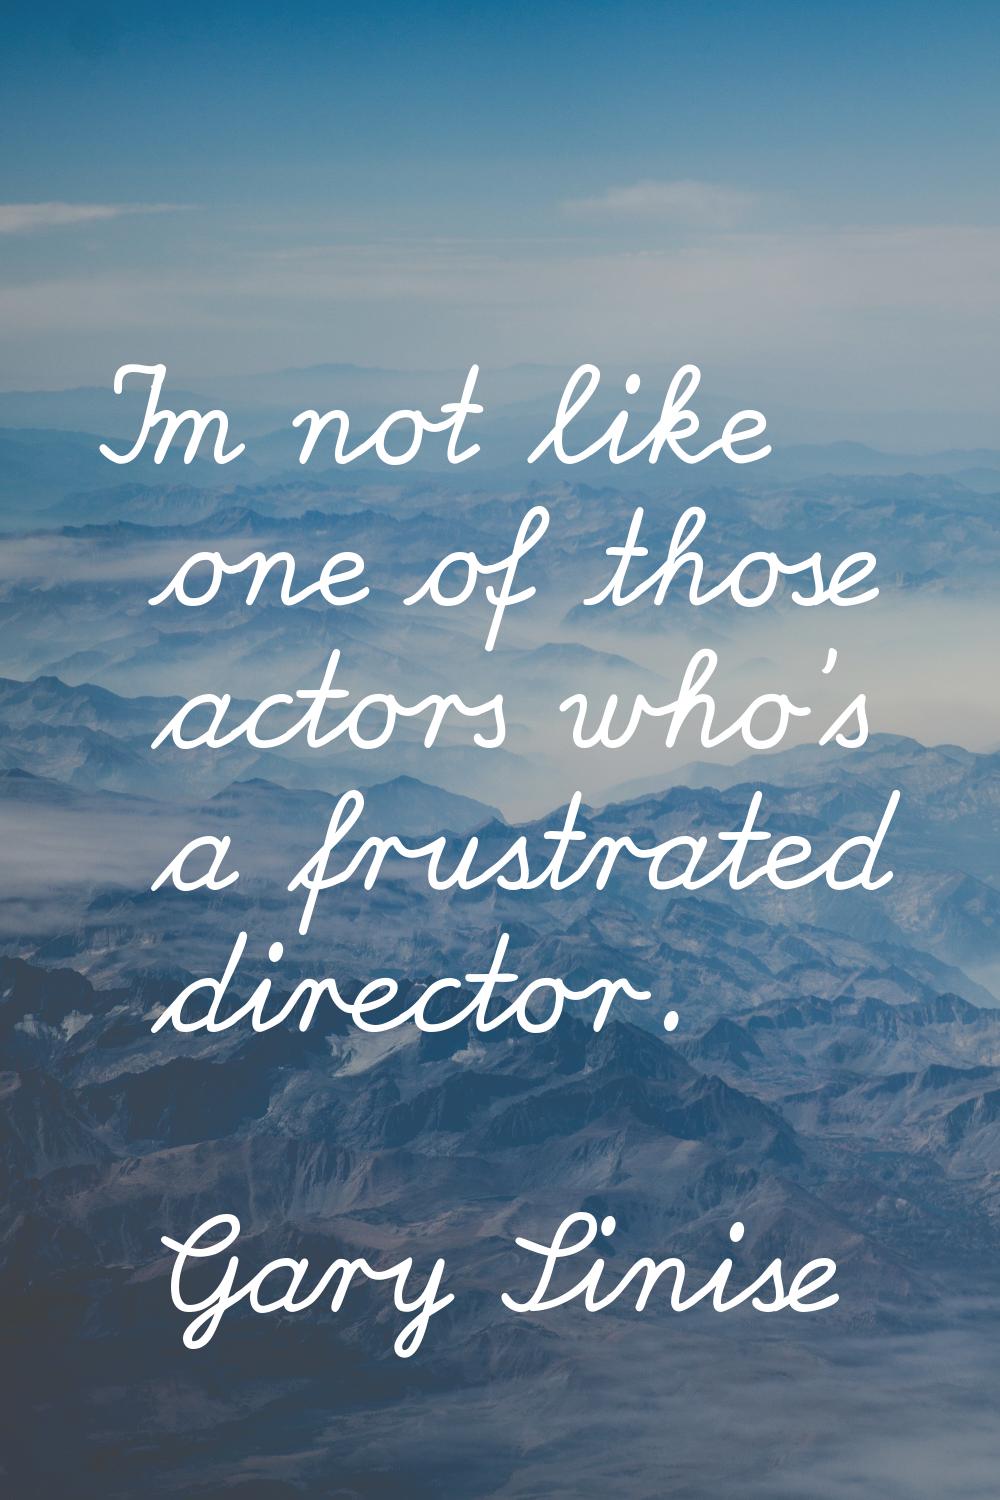 I'm not like one of those actors who's a frustrated director.